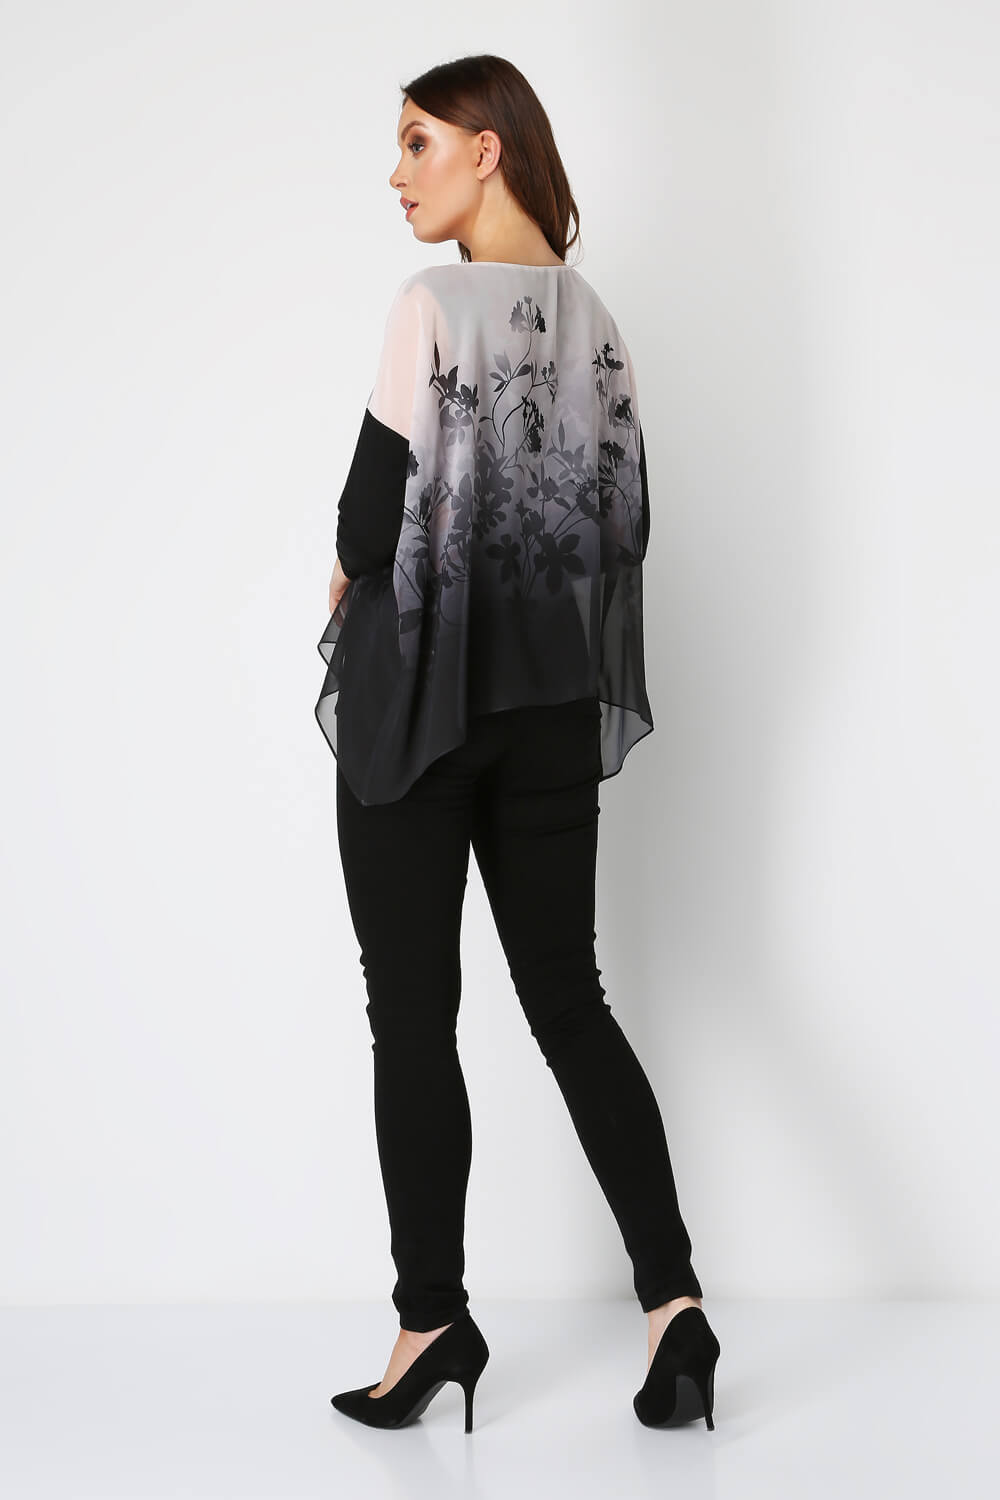 Black Soft Floral Overlay Chiffon Top, Image 4 of 5